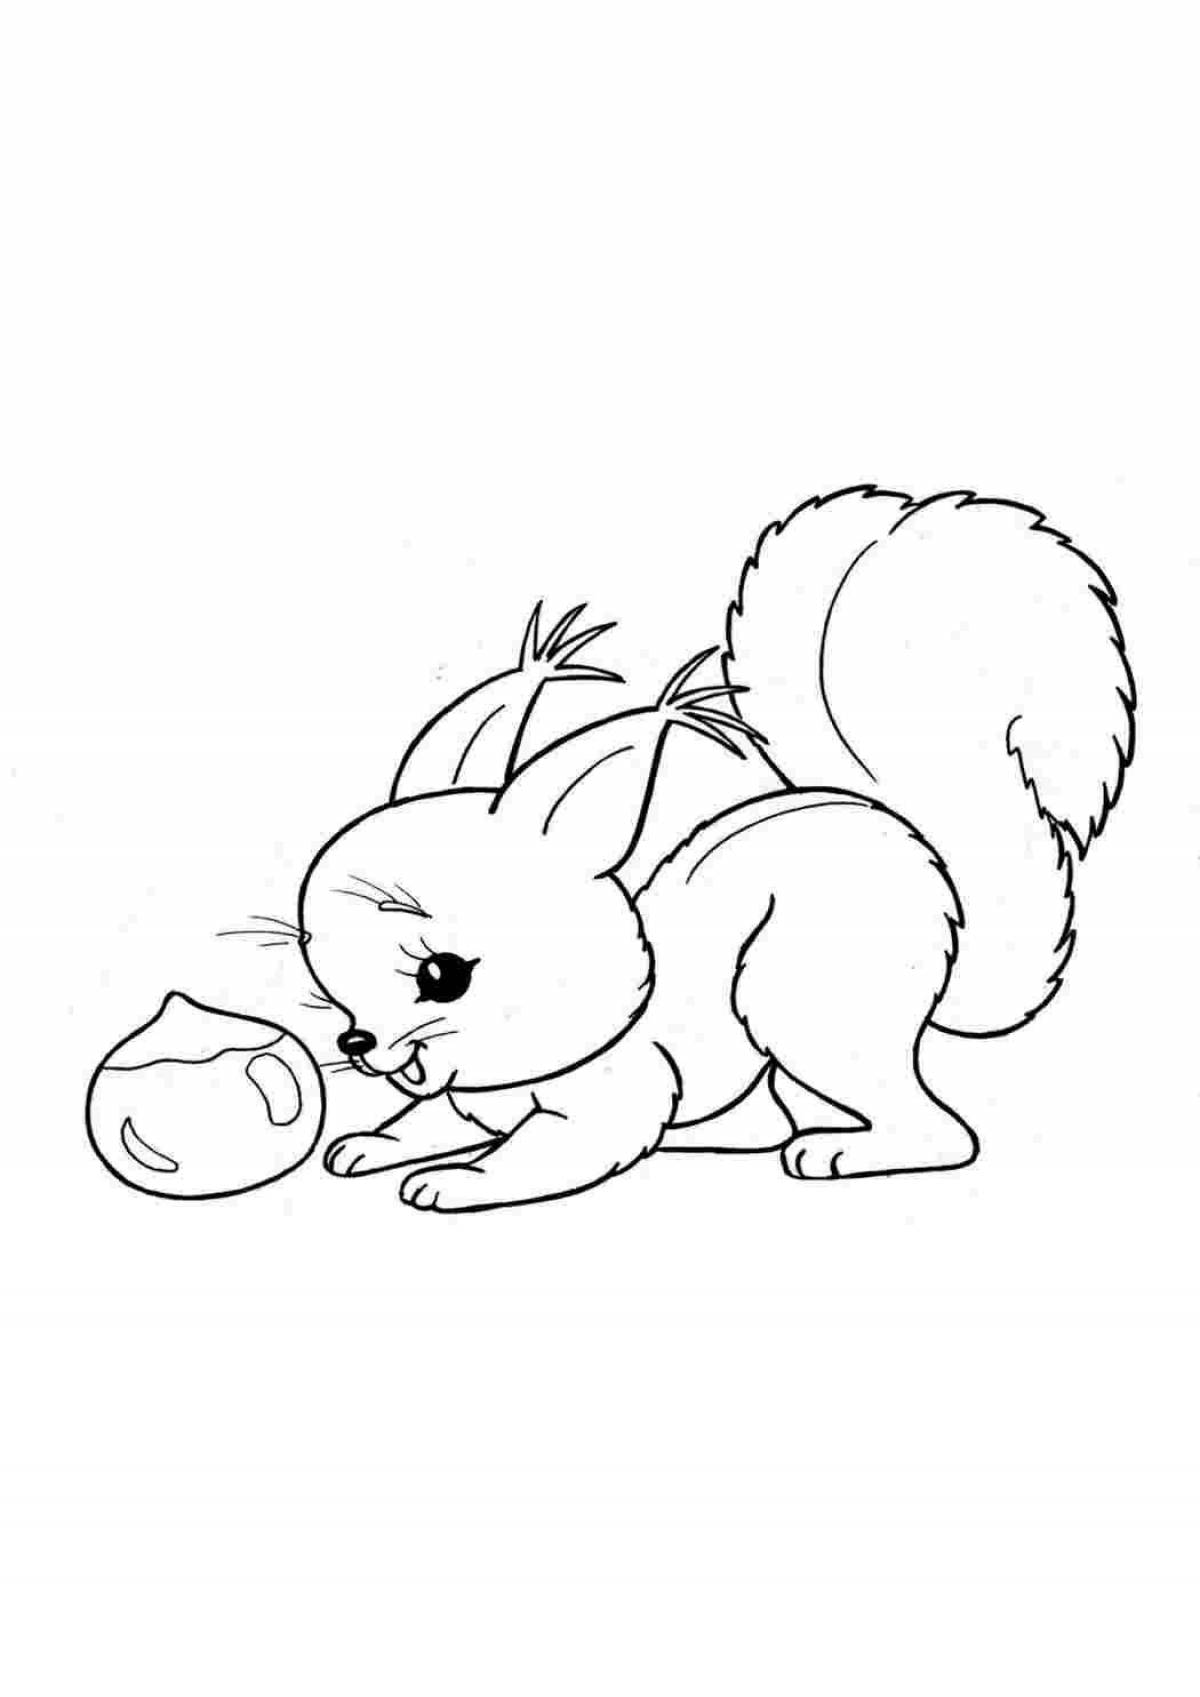 Colorful squirrel coloring page